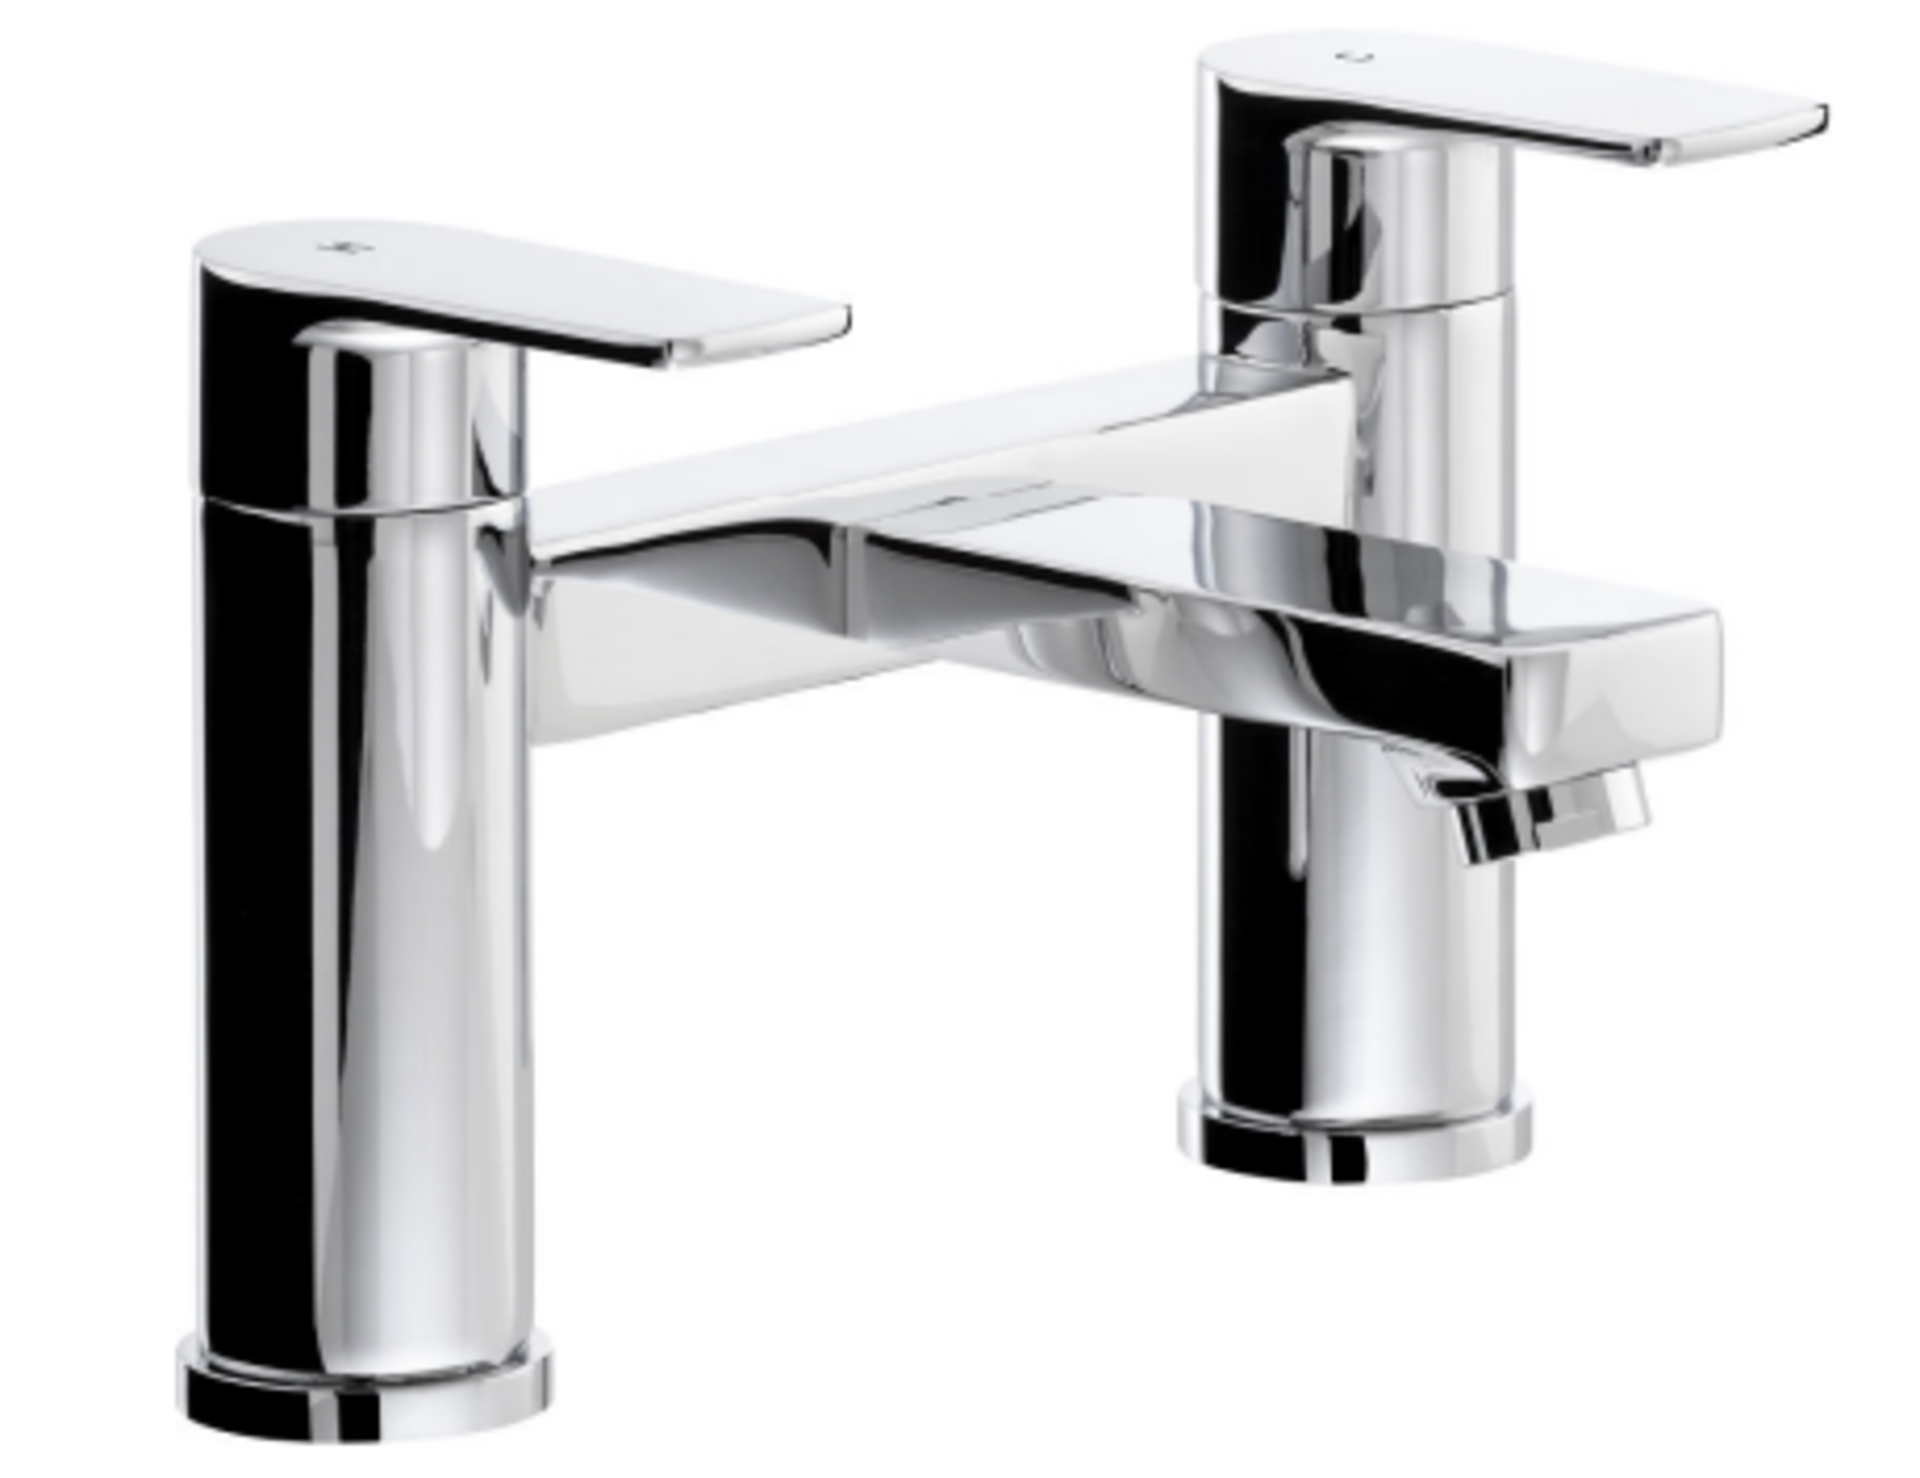 2 x NEW BOXED Abode Lamona CONTEMPORARY CHROME BATH TAPS. RRP £129.99 EACH, GIVING THIS LOT A - Image 2 of 2